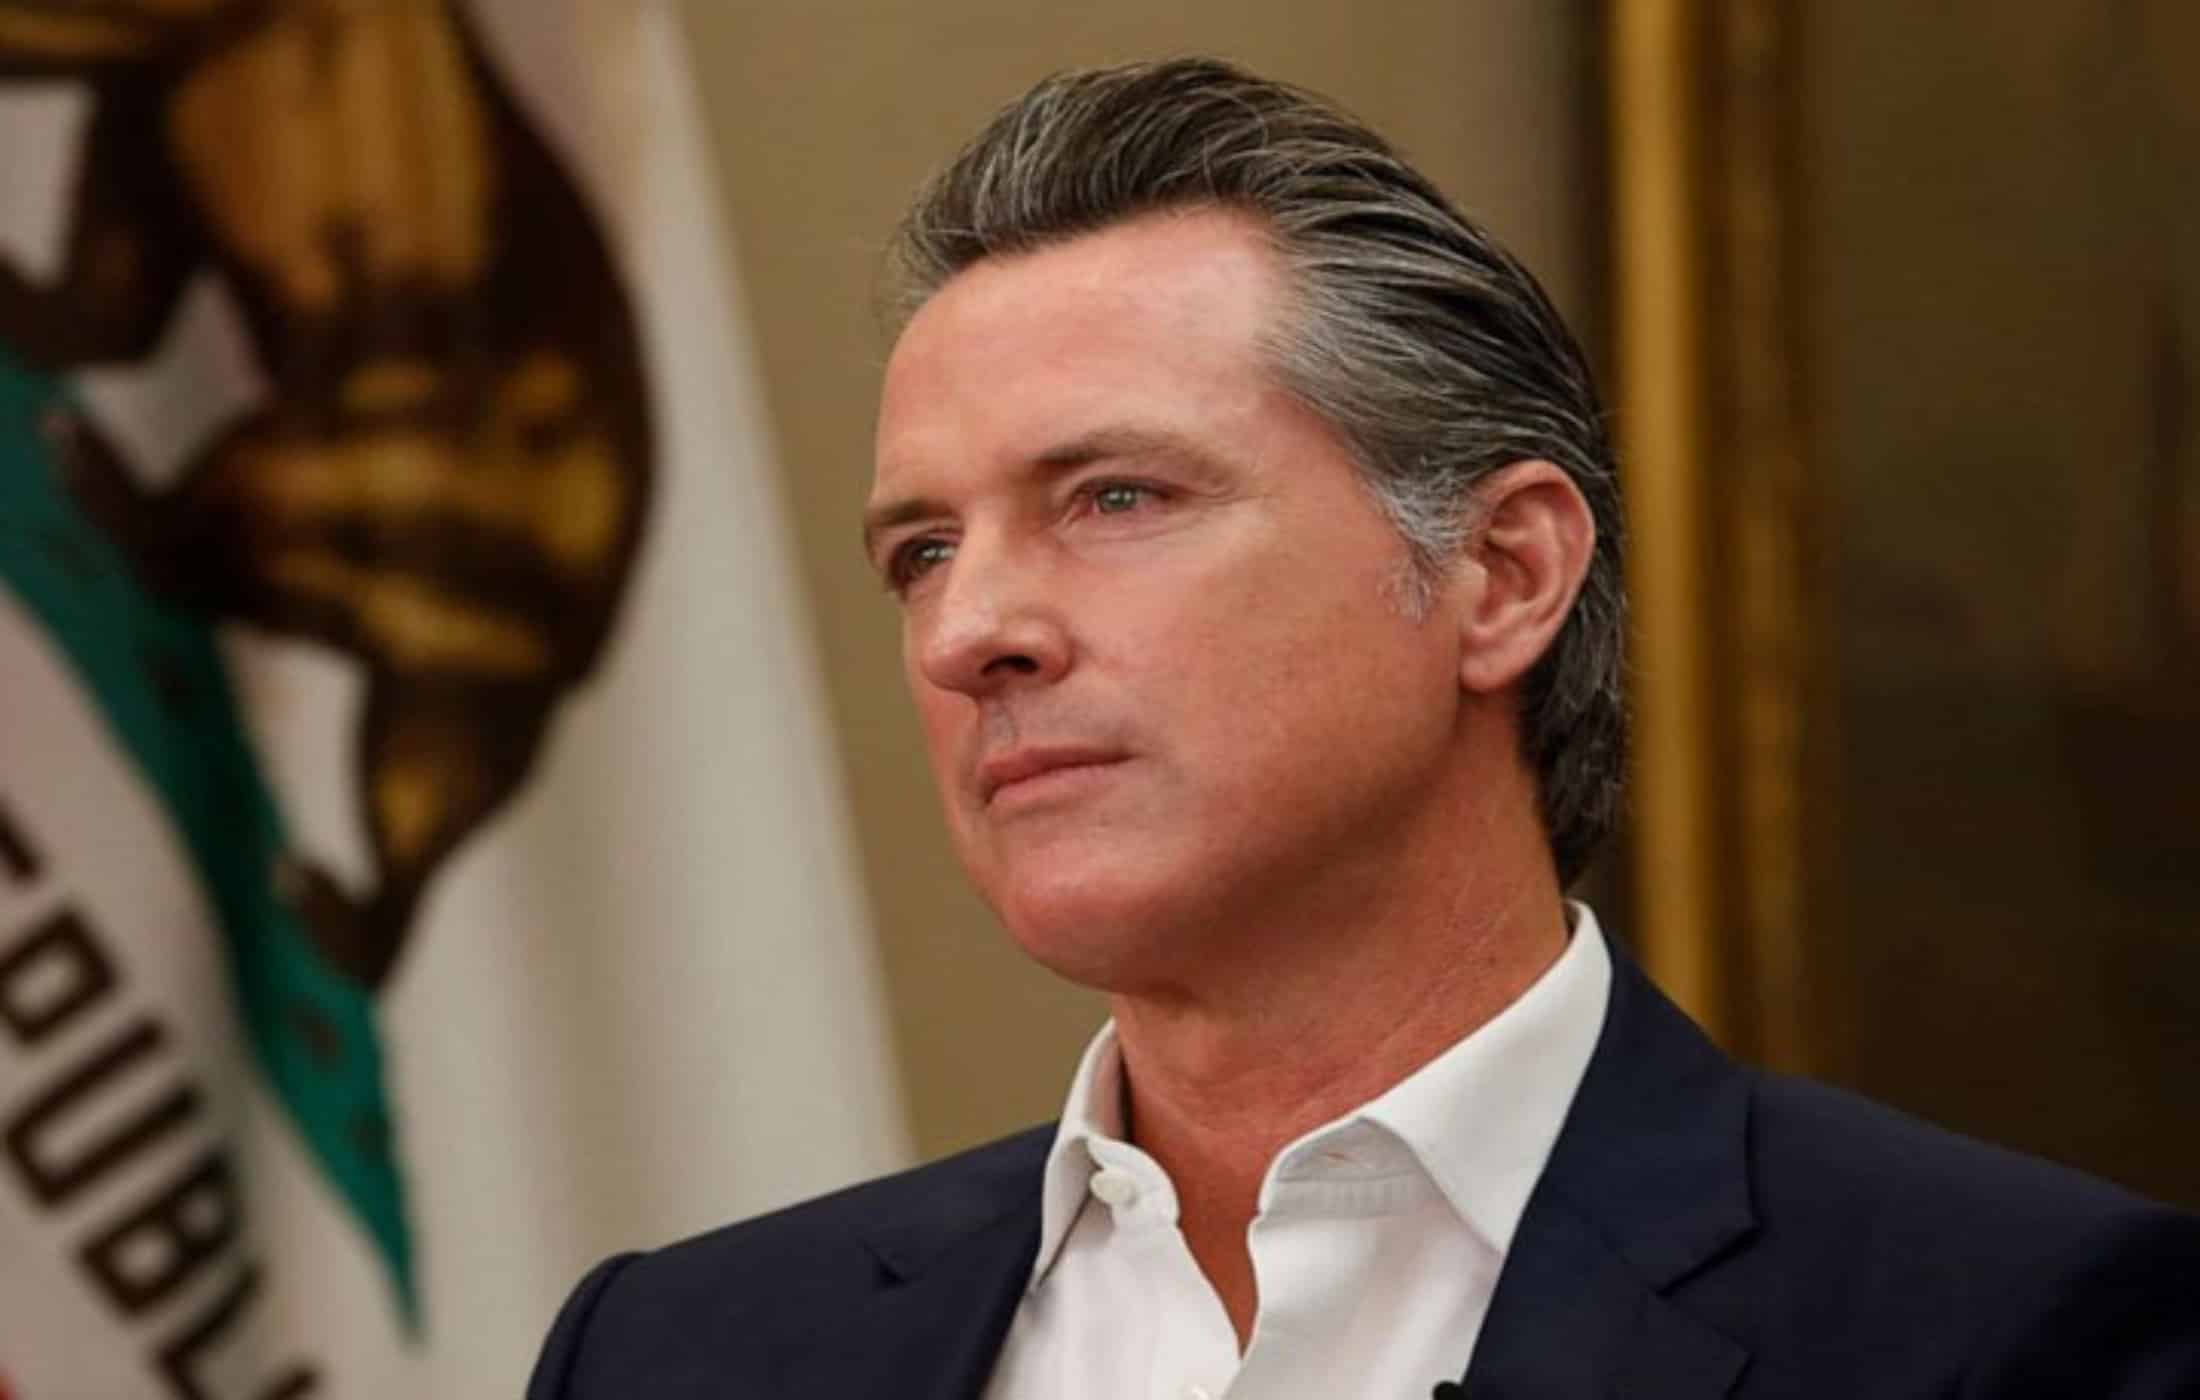 gavin-newsom-net-worth-age-height-wiki-family-biography-and-latest